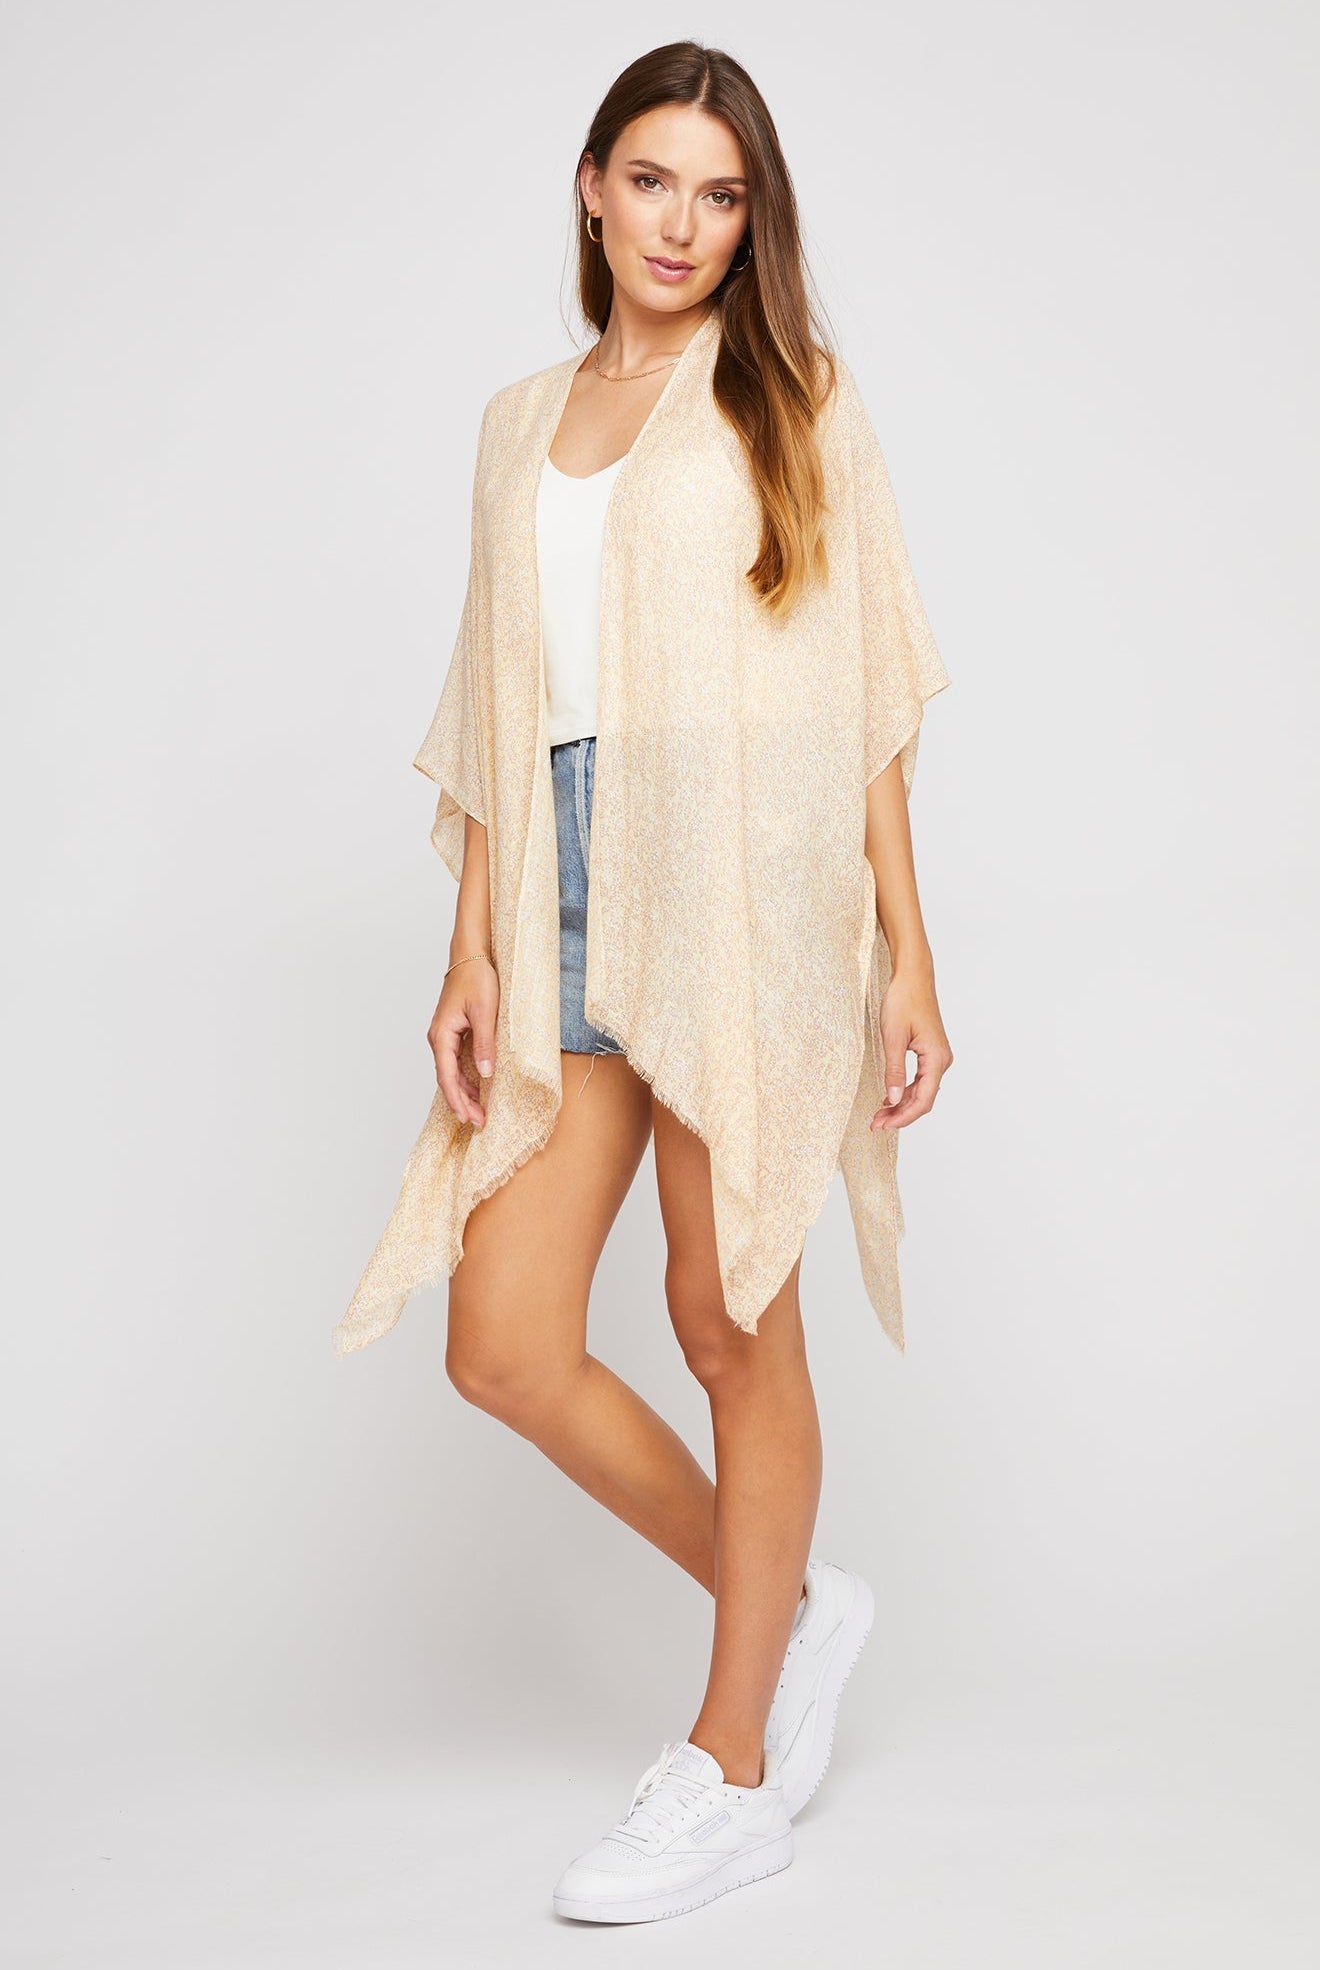 Dawn, Sunlight Cover-Up-Outerwear-Vixen Collection, Day Spa and Women's Boutique Located in Seattle, Washington